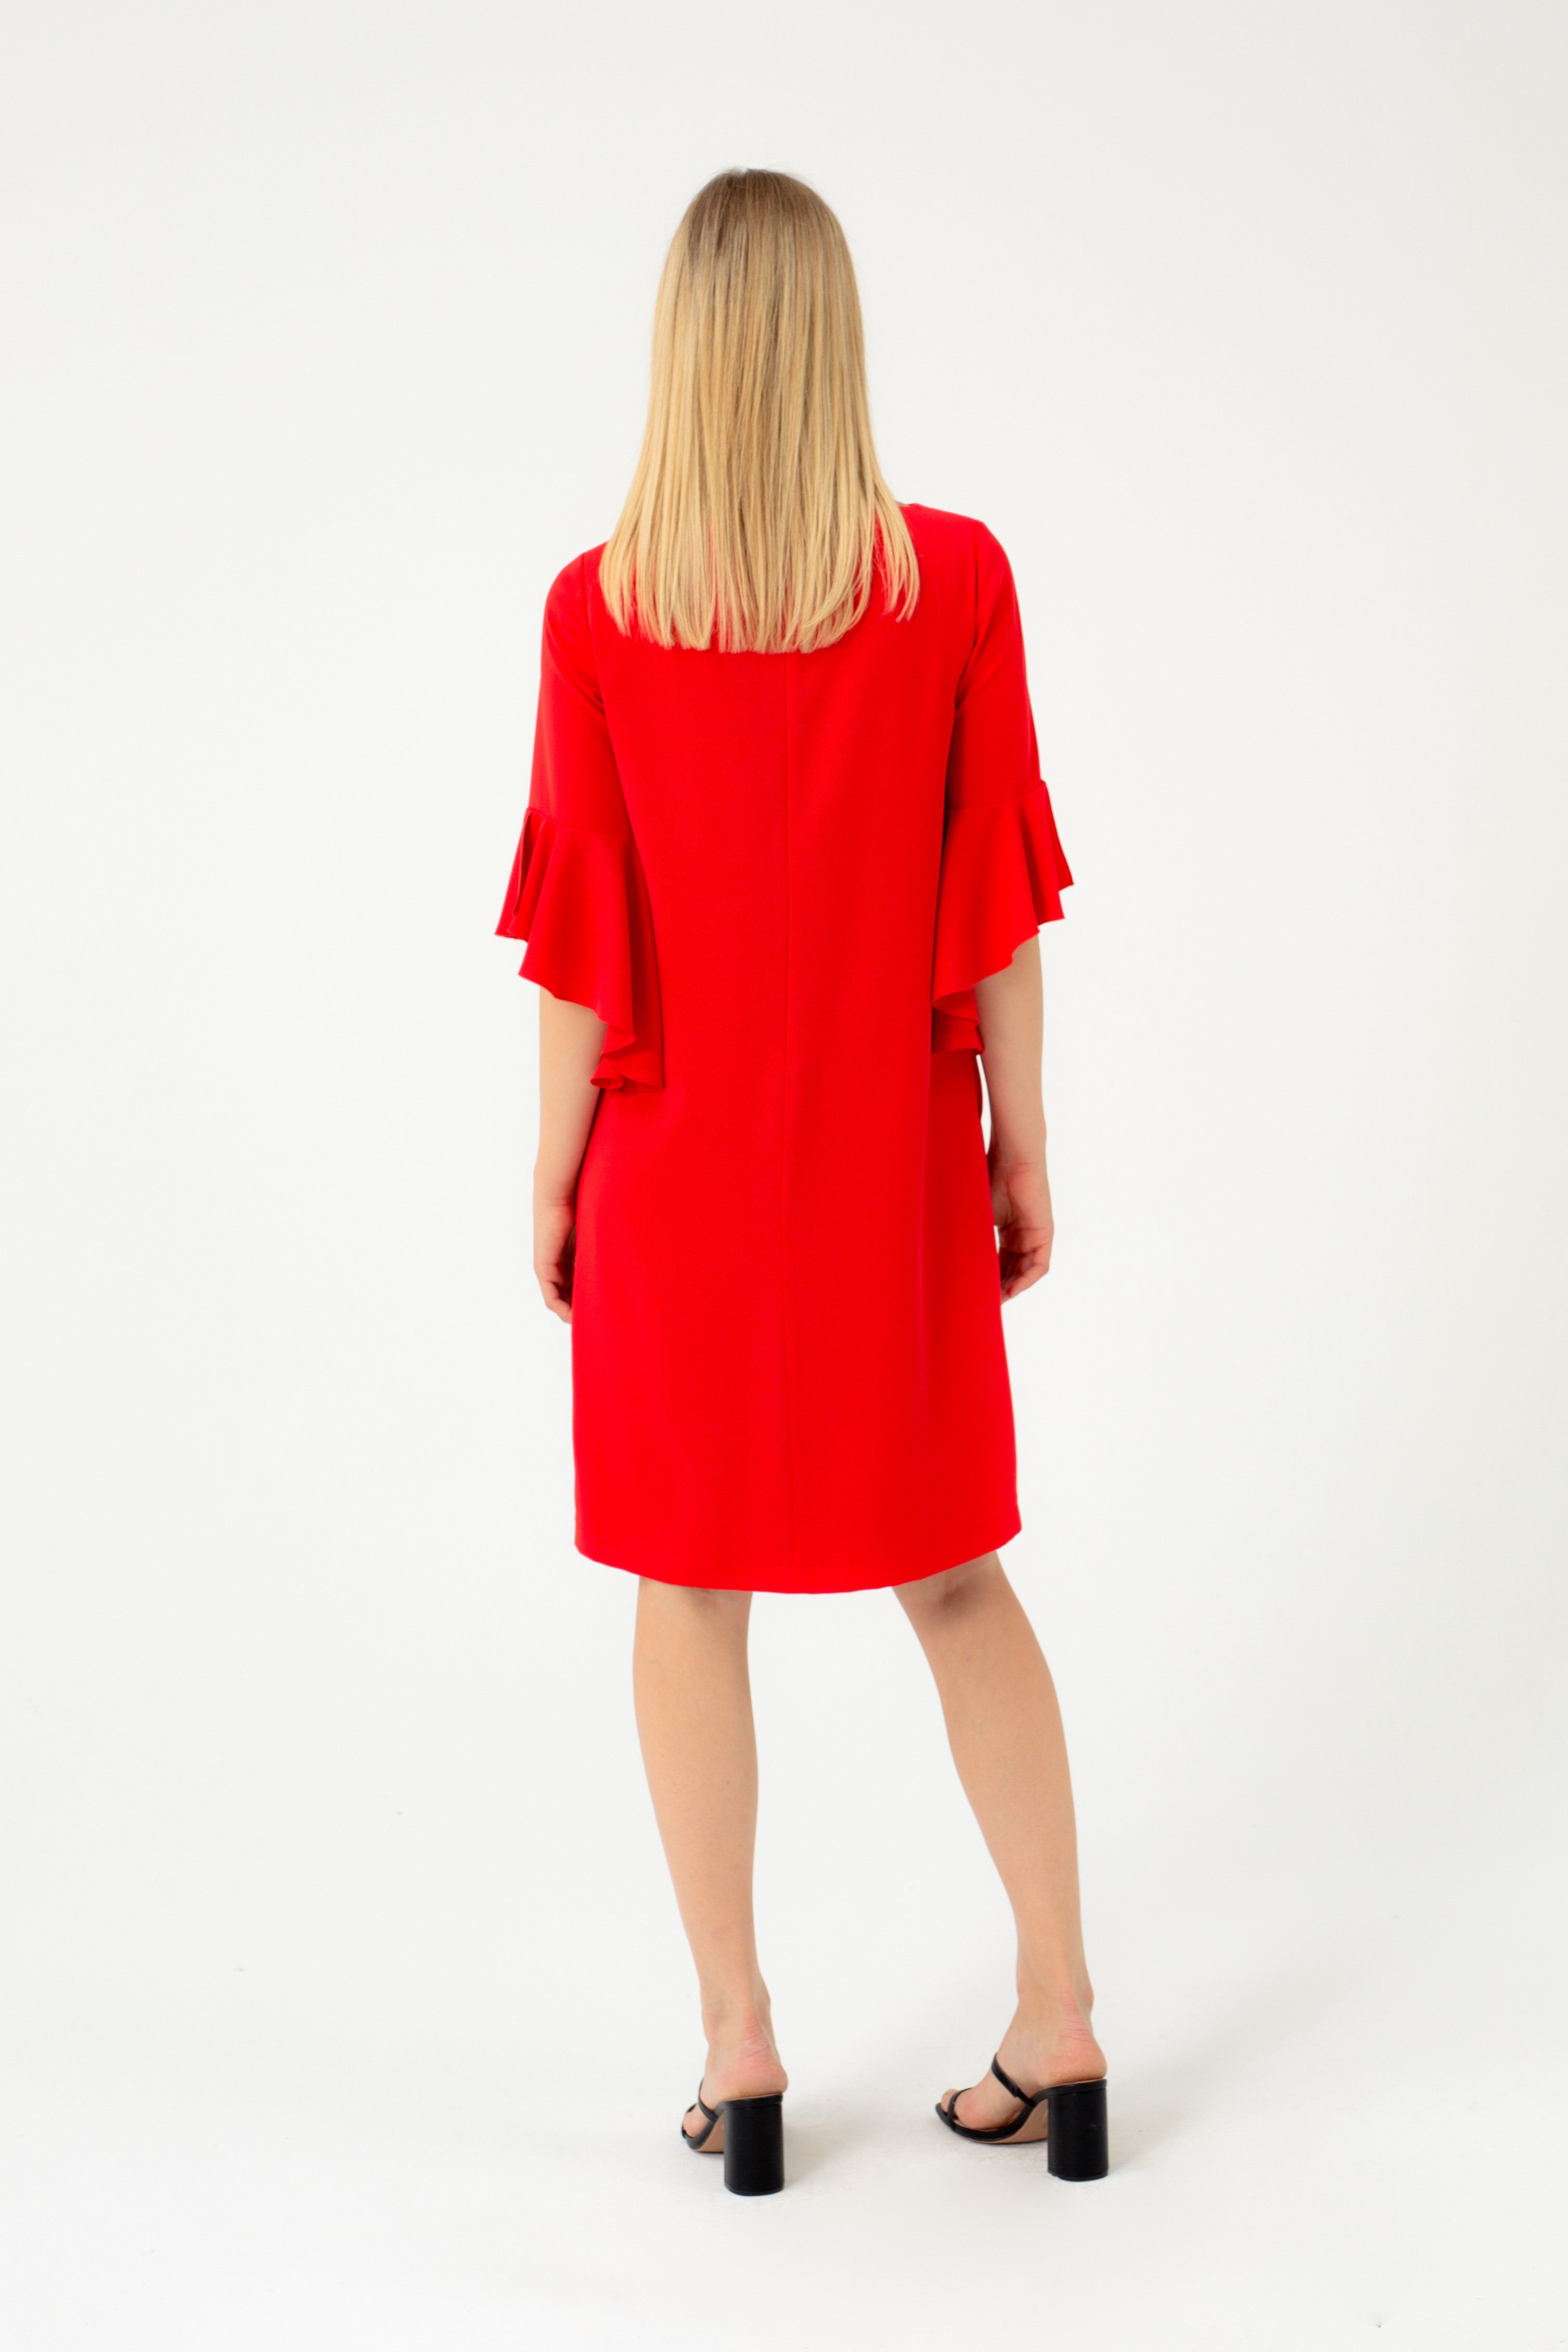 RED DRESS WITH RUFFLES ON THE SLEEVES